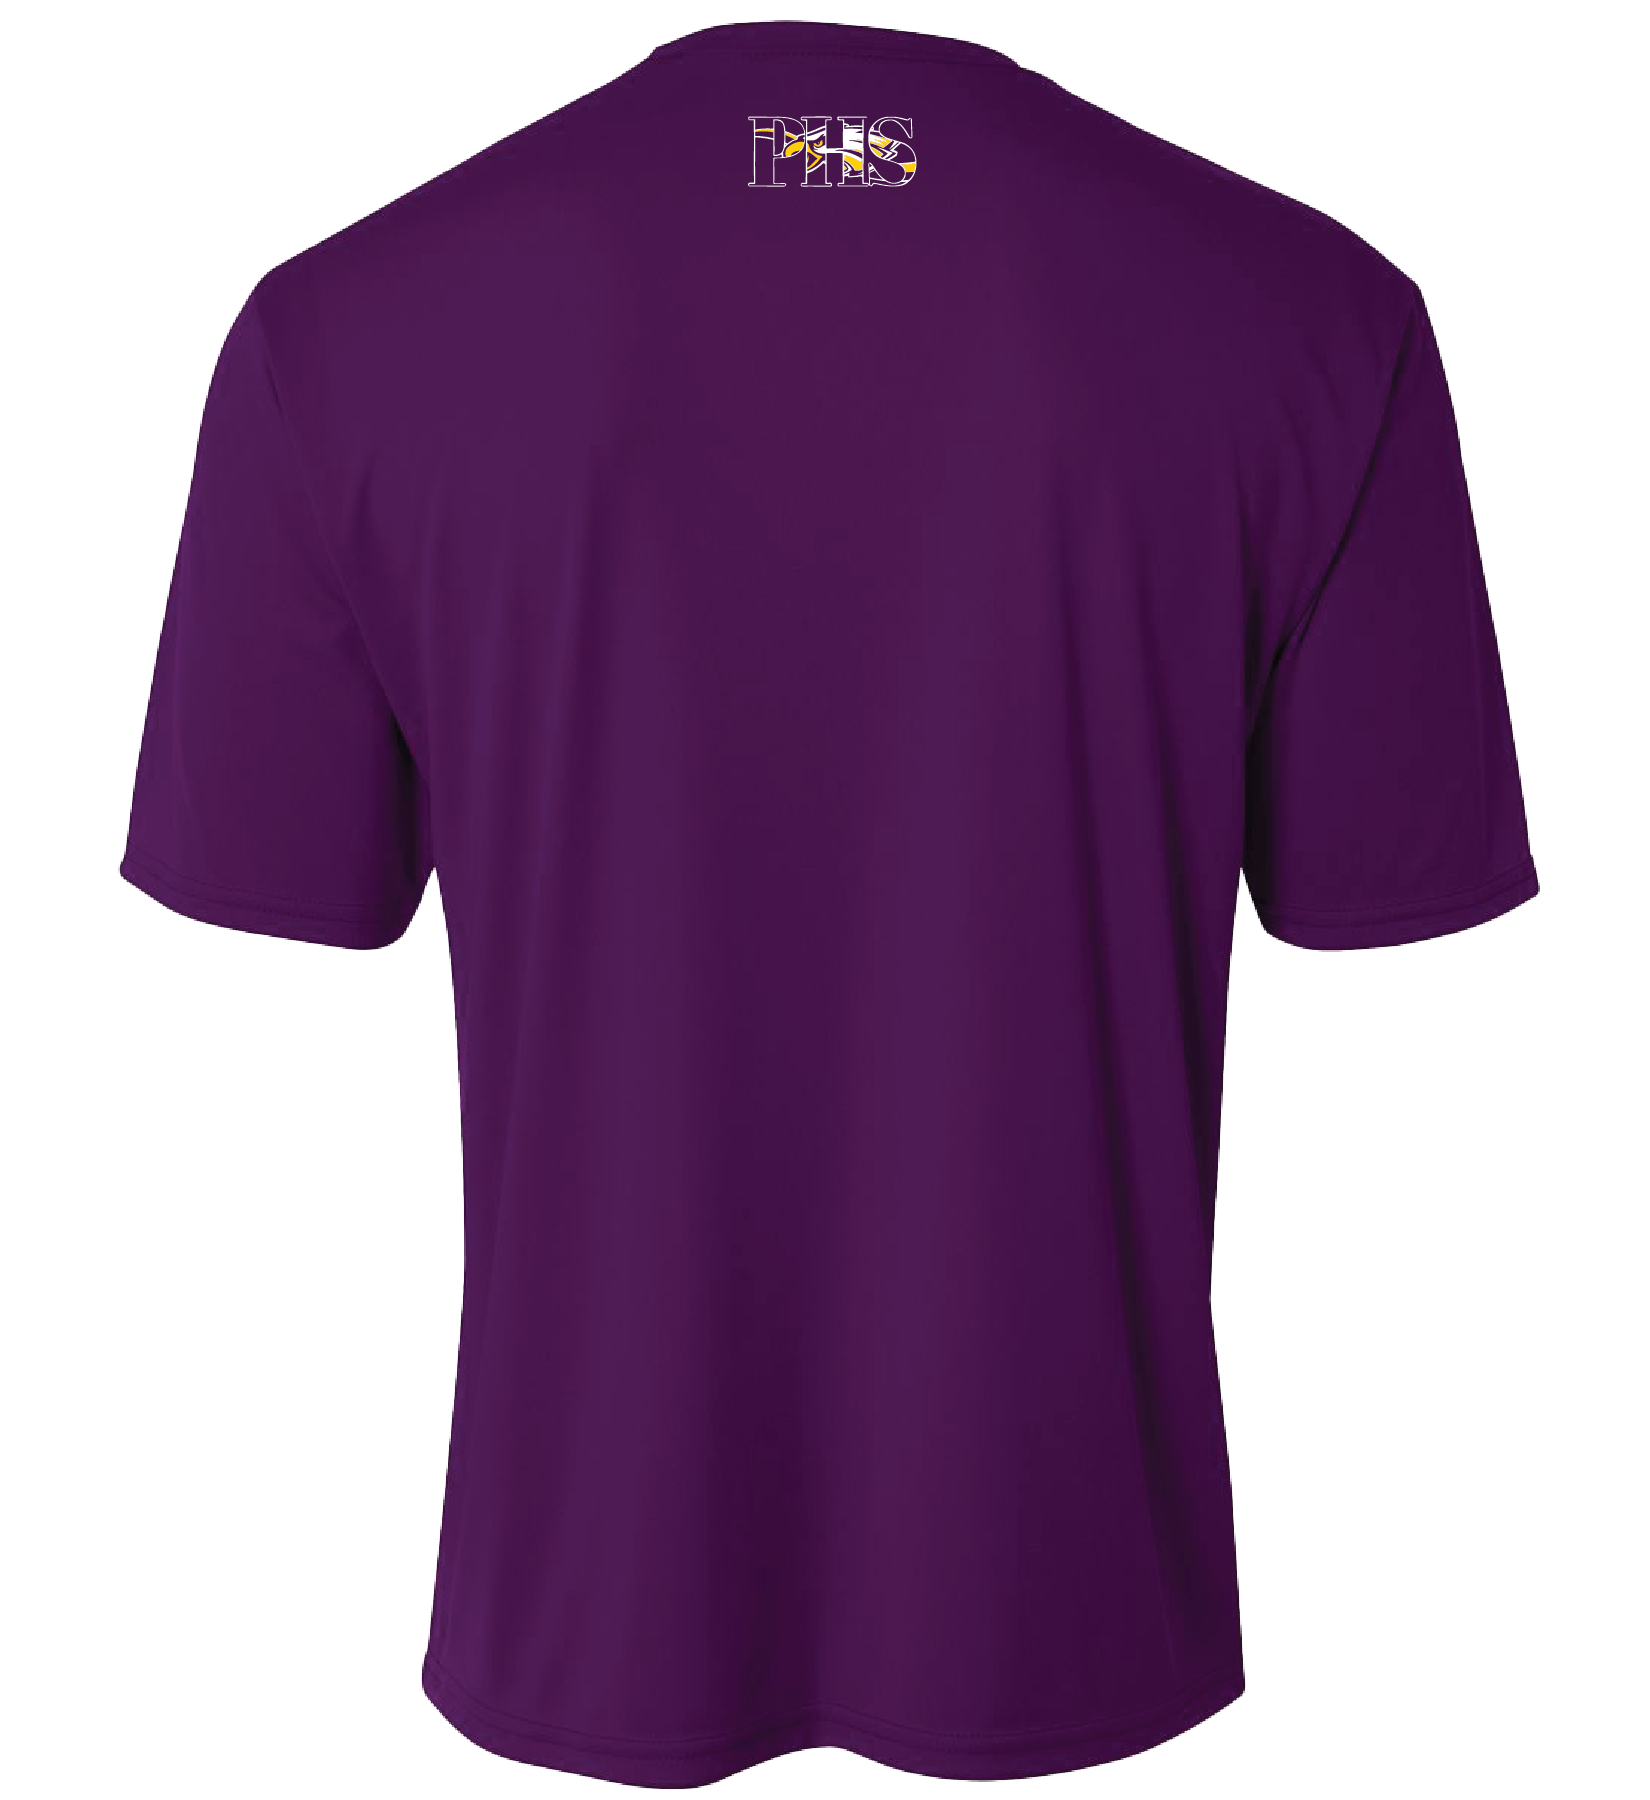 Pecos Performance Shirt - REQUIRED